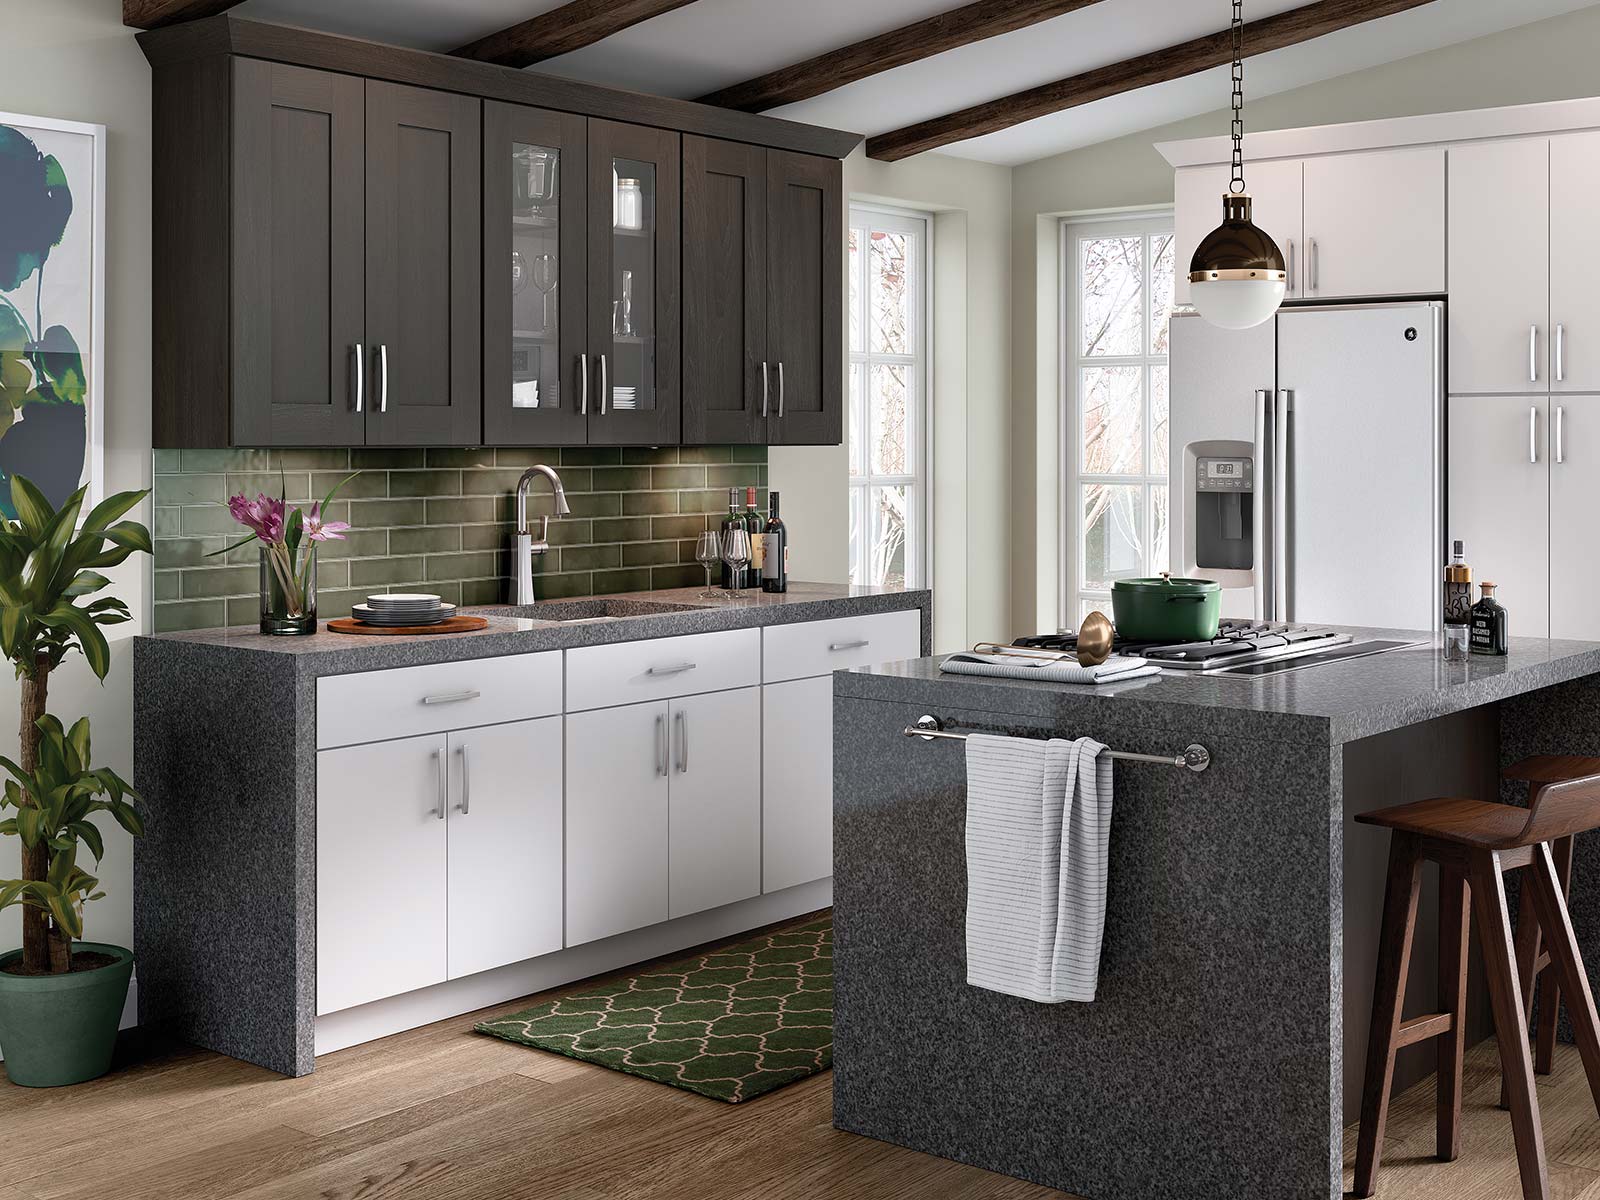 Bertch Shale Nordic Quincy Lakeside Cabinets